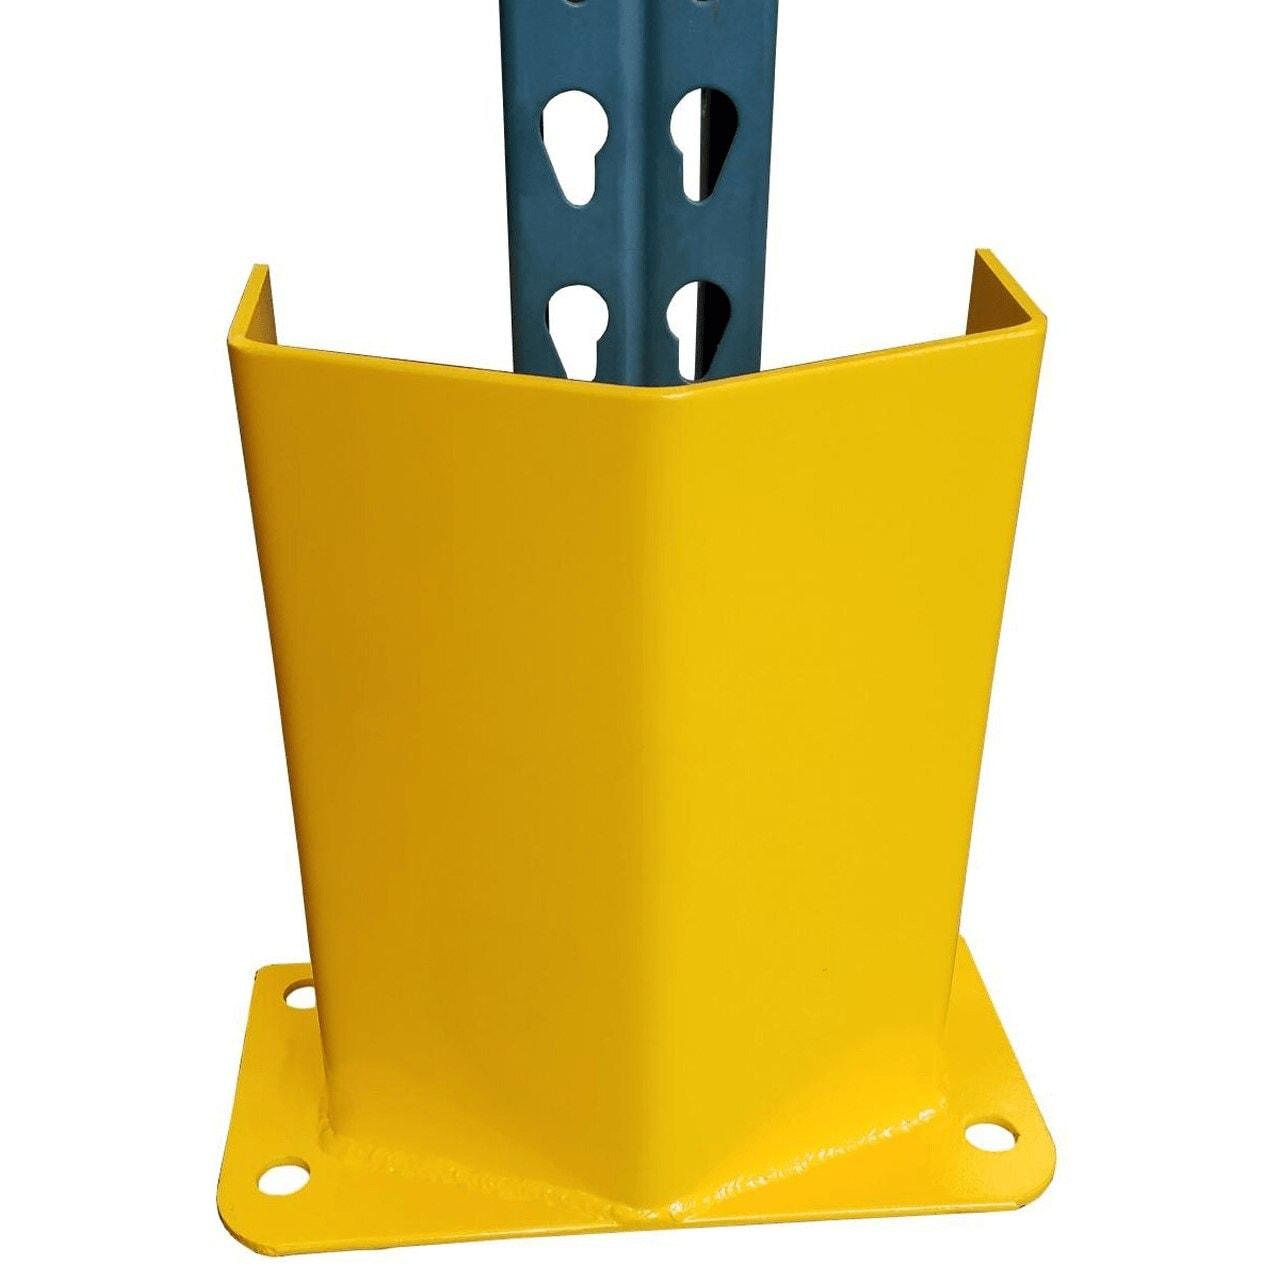 Upright Post Protector